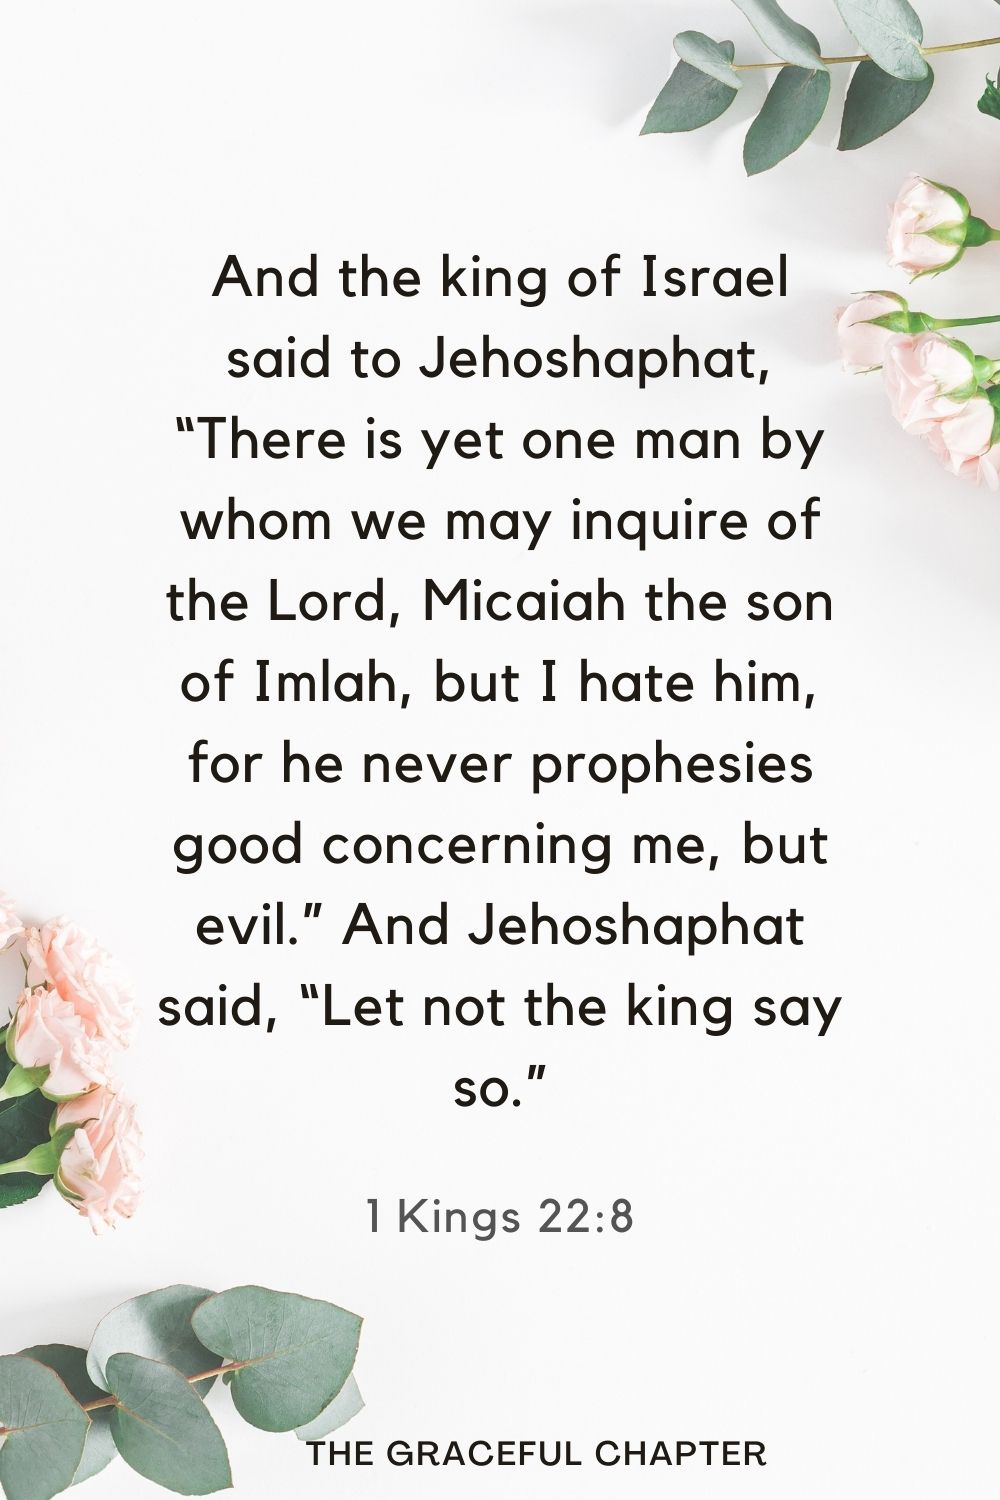 And the king of Israel said to Jehoshaphat, “There is yet one man by whom we may inquire of the Lord, Micaiah the son of Imlah, but I hate him, for he never prophesies good concerning me, but evil.” And Jehoshaphat said, “Let not the king say so.” 1 Kings 22:8